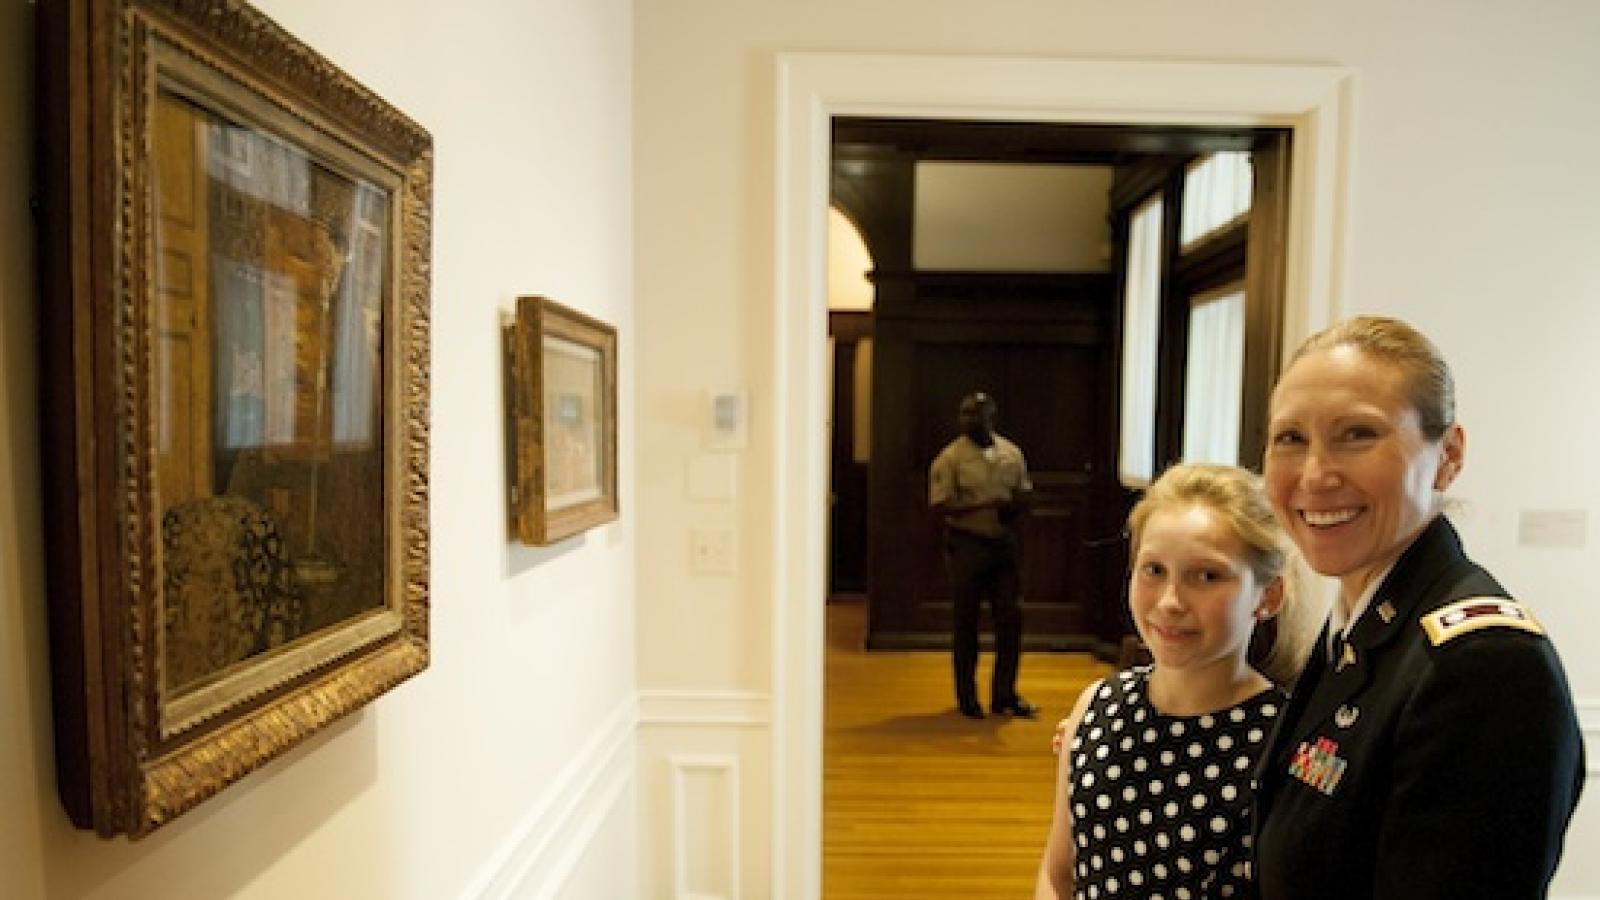 A white woman in military dress stands in front of two paintings with her young daughter